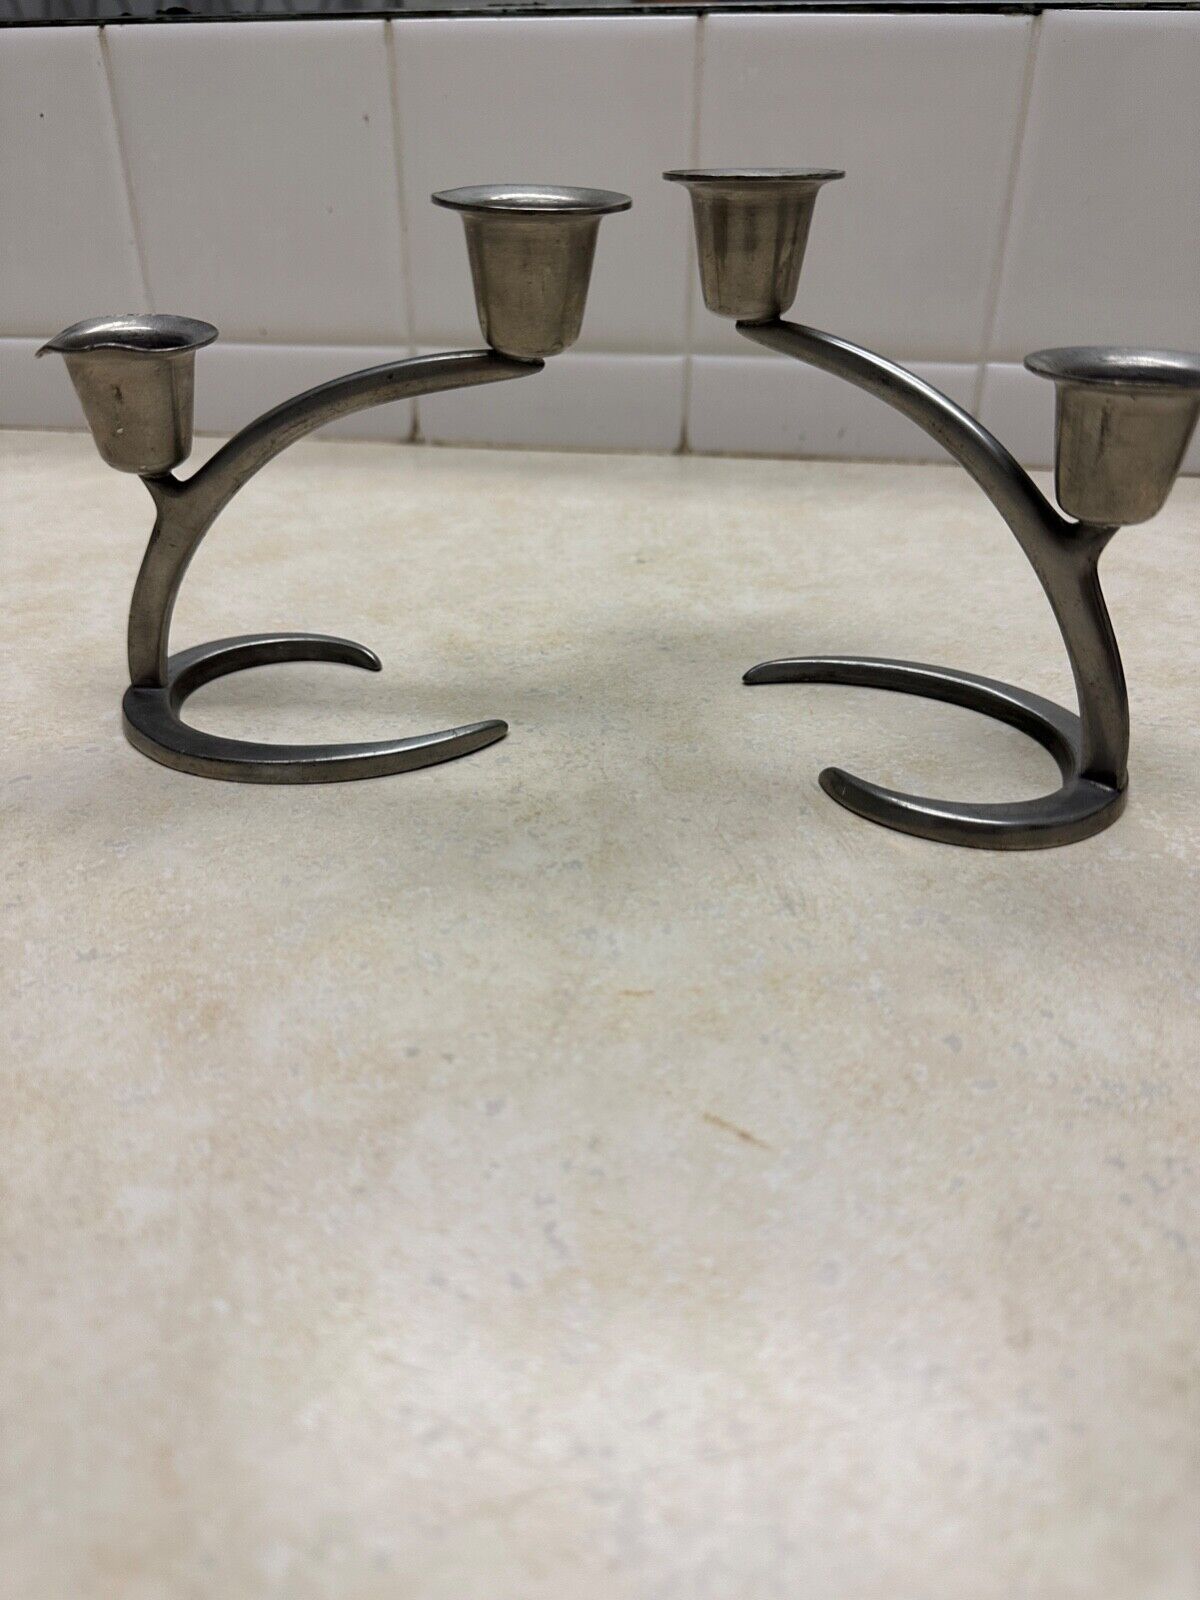 Pair of Mid Centry MCM Crescent Base Candle Holders DF